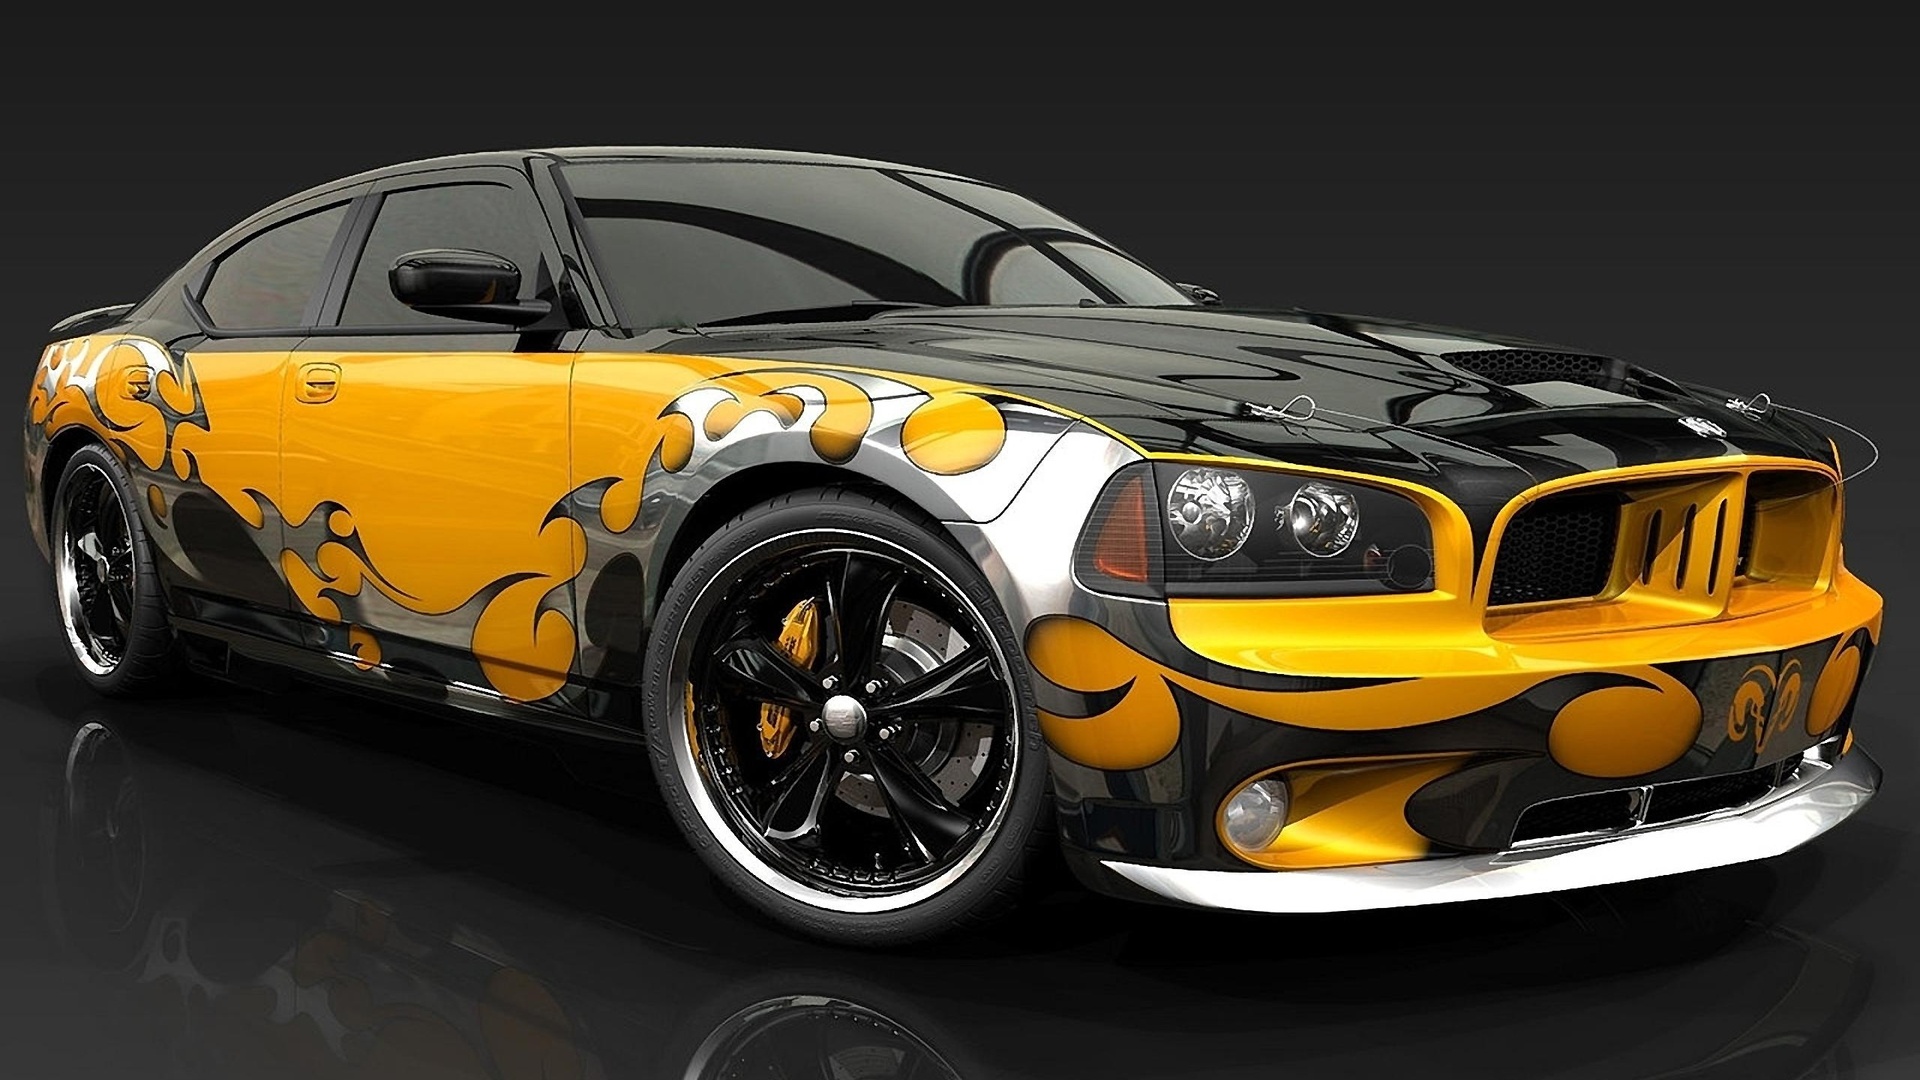 Very Colorful Car Wallpaper55 Best Wallpaper For Pcs